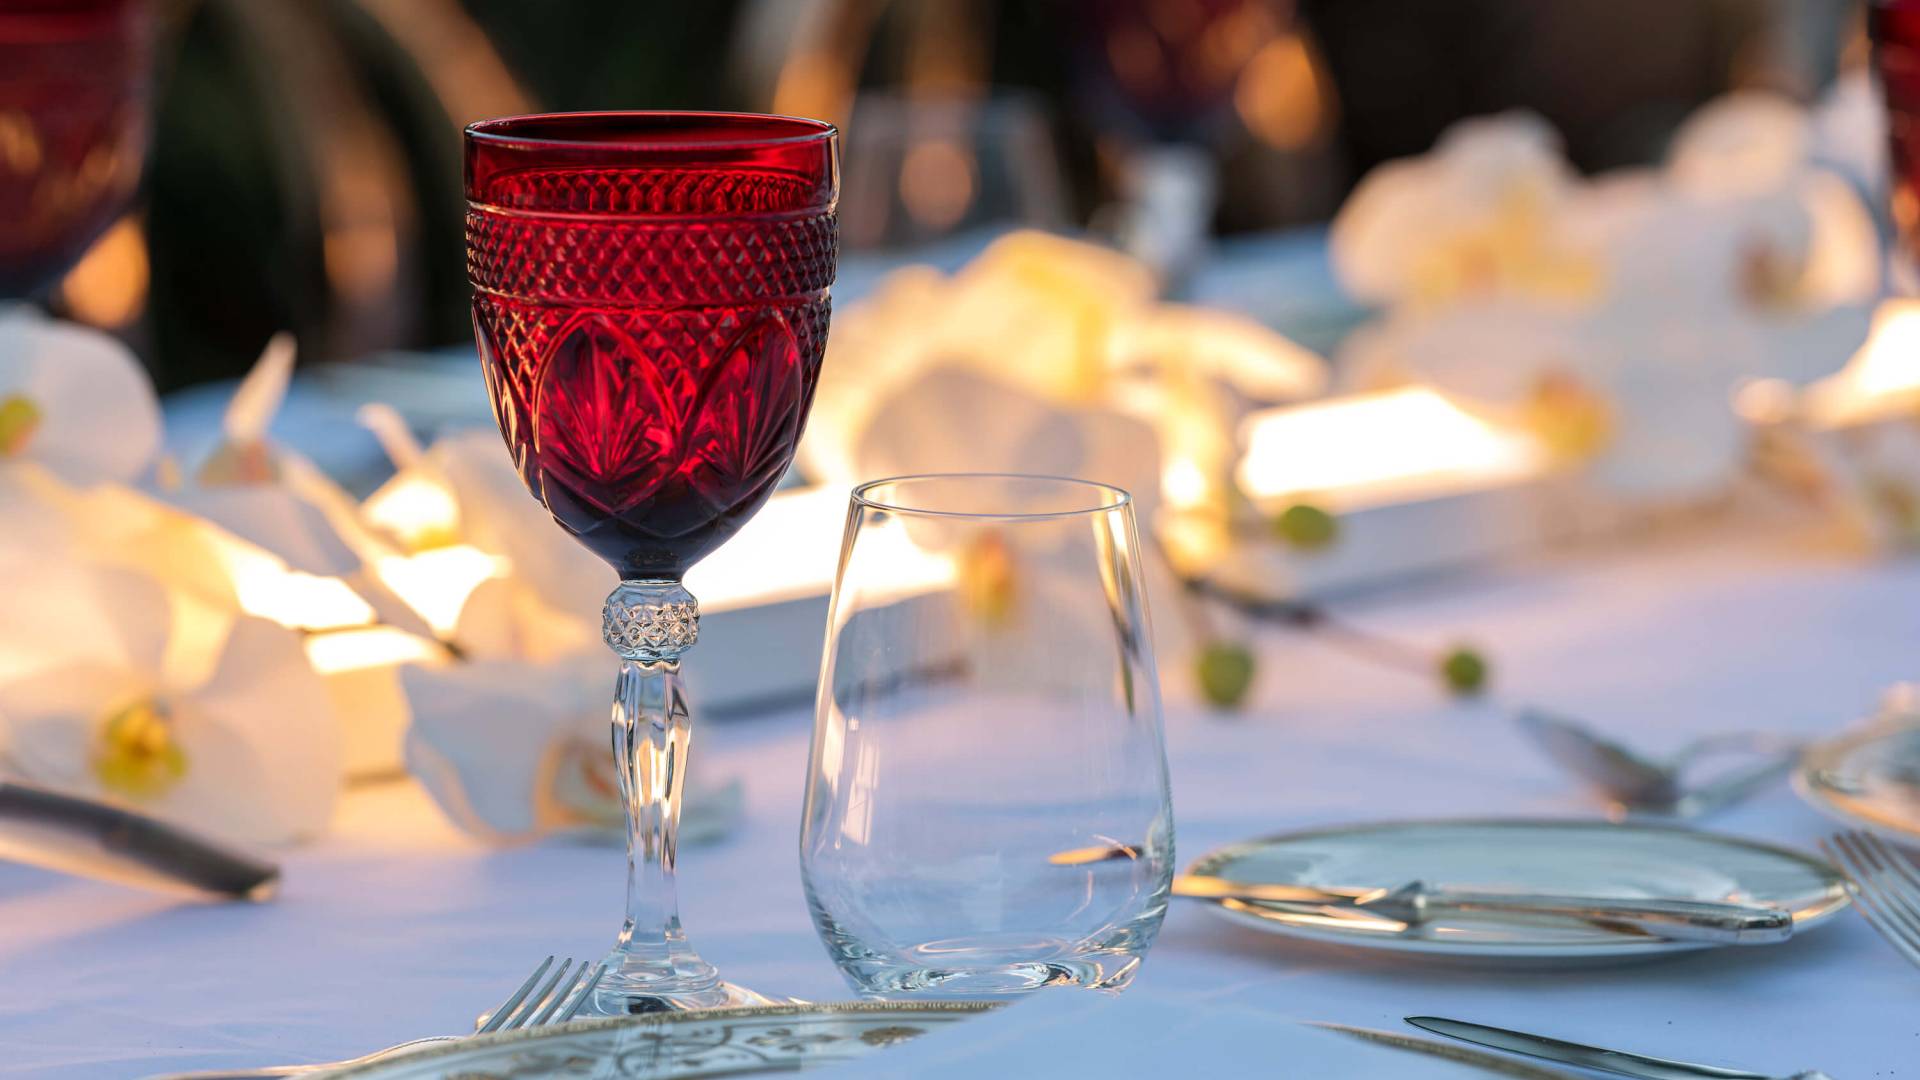 wine glass on wedding reception table with flowers